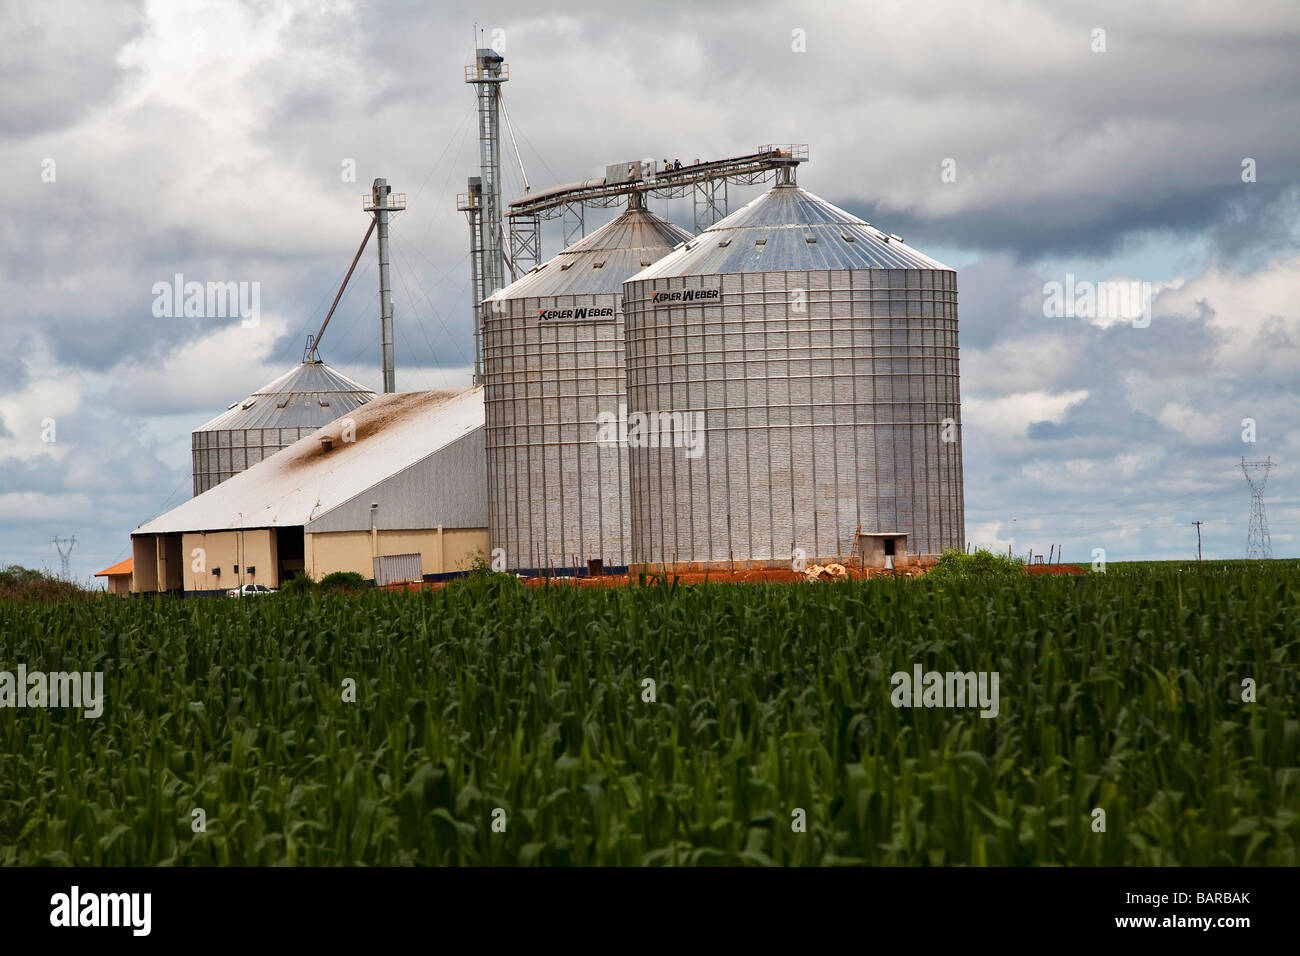 Agriculture corn plantation and silos BR 163 road at Mato Grosso State Brazil Stock Photo